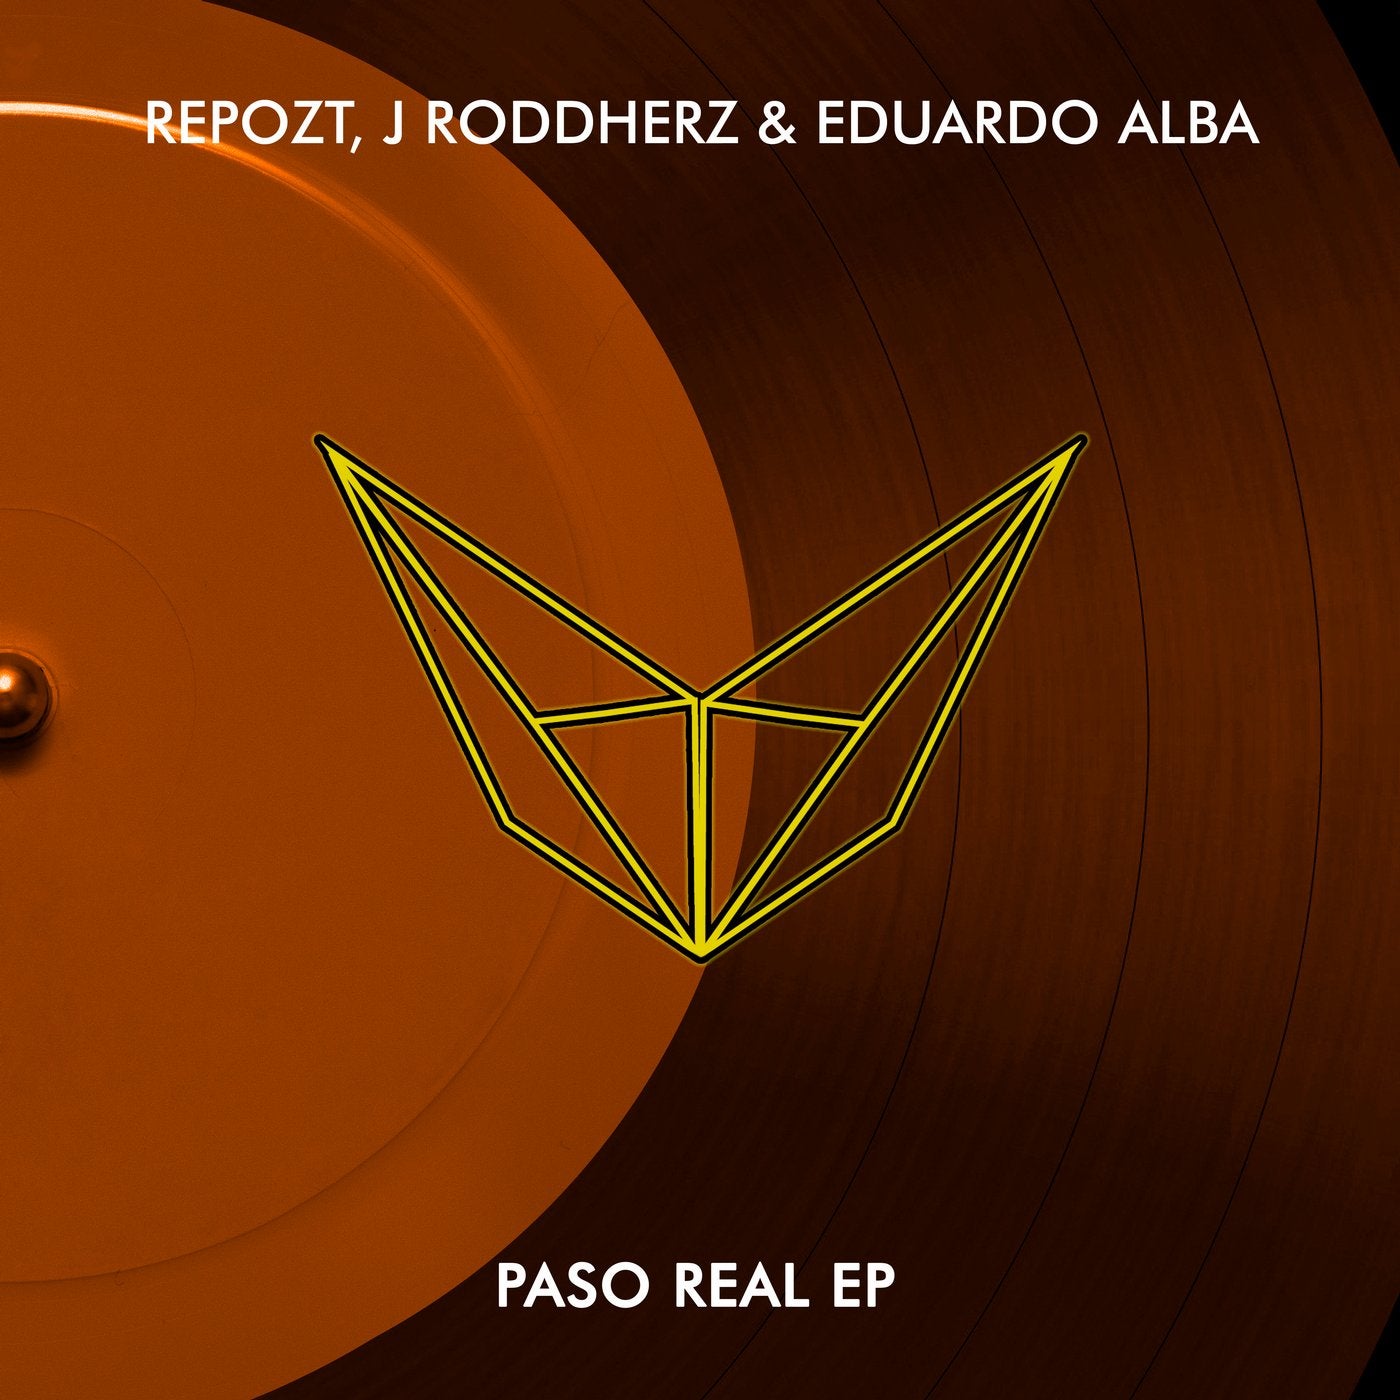 Paso Real EP